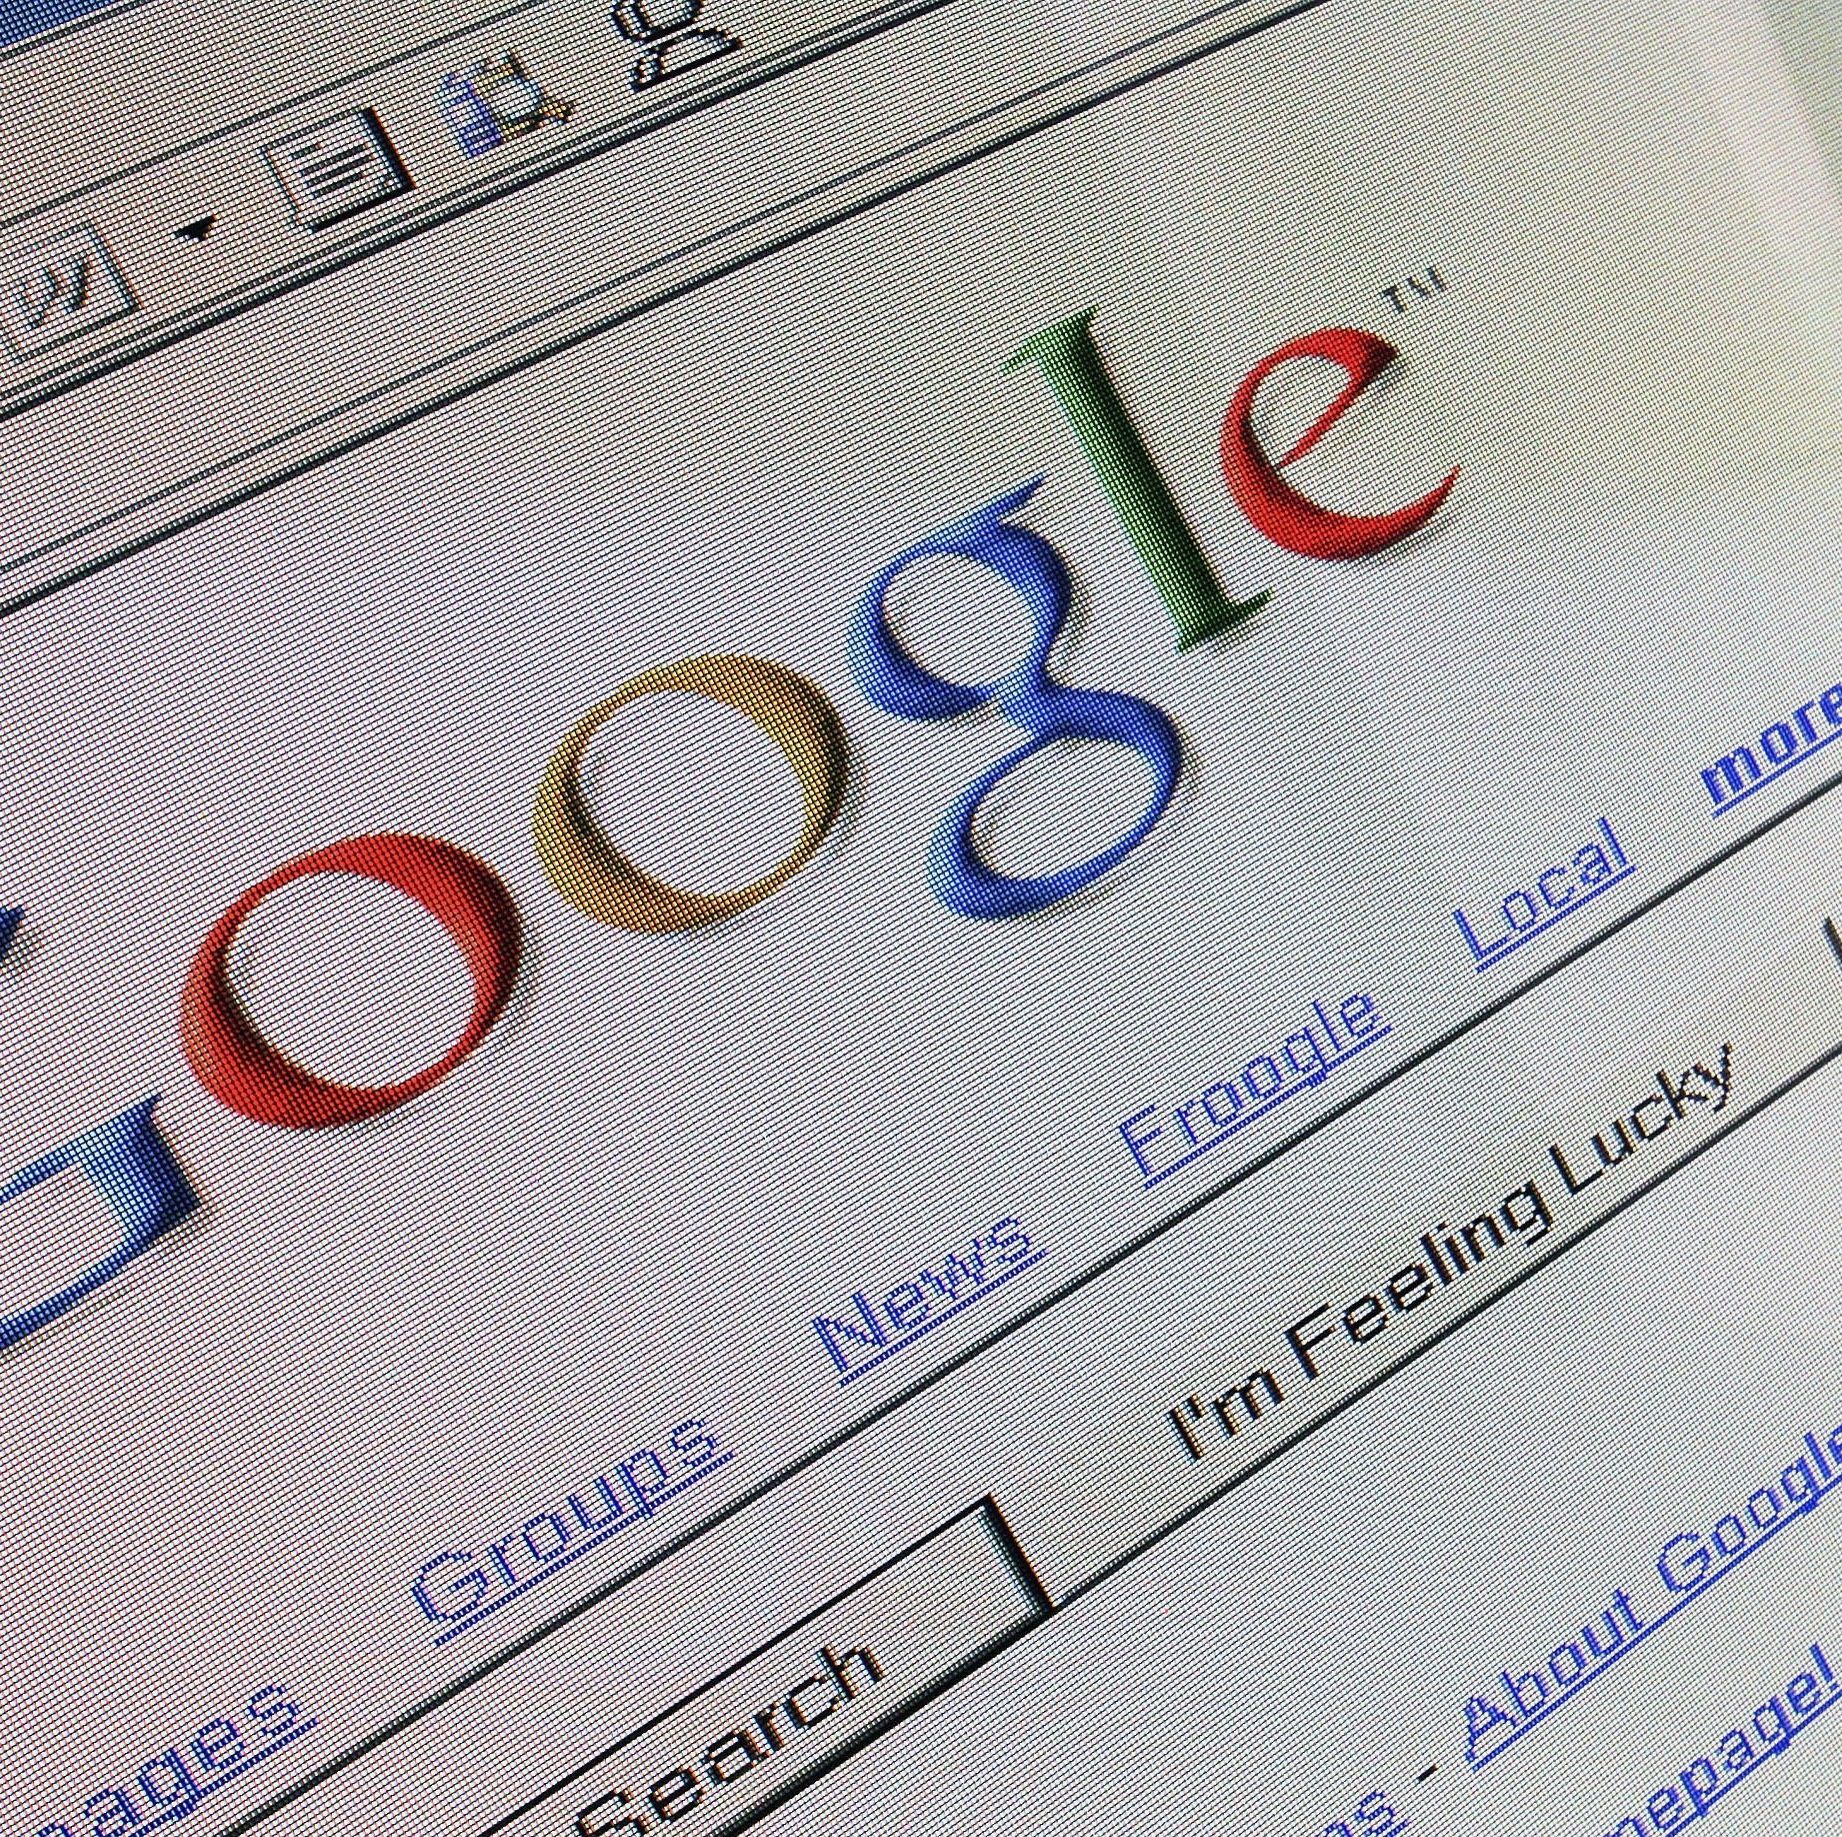 How the Google Monopoly Trial Will Shape the Future of Search Engines